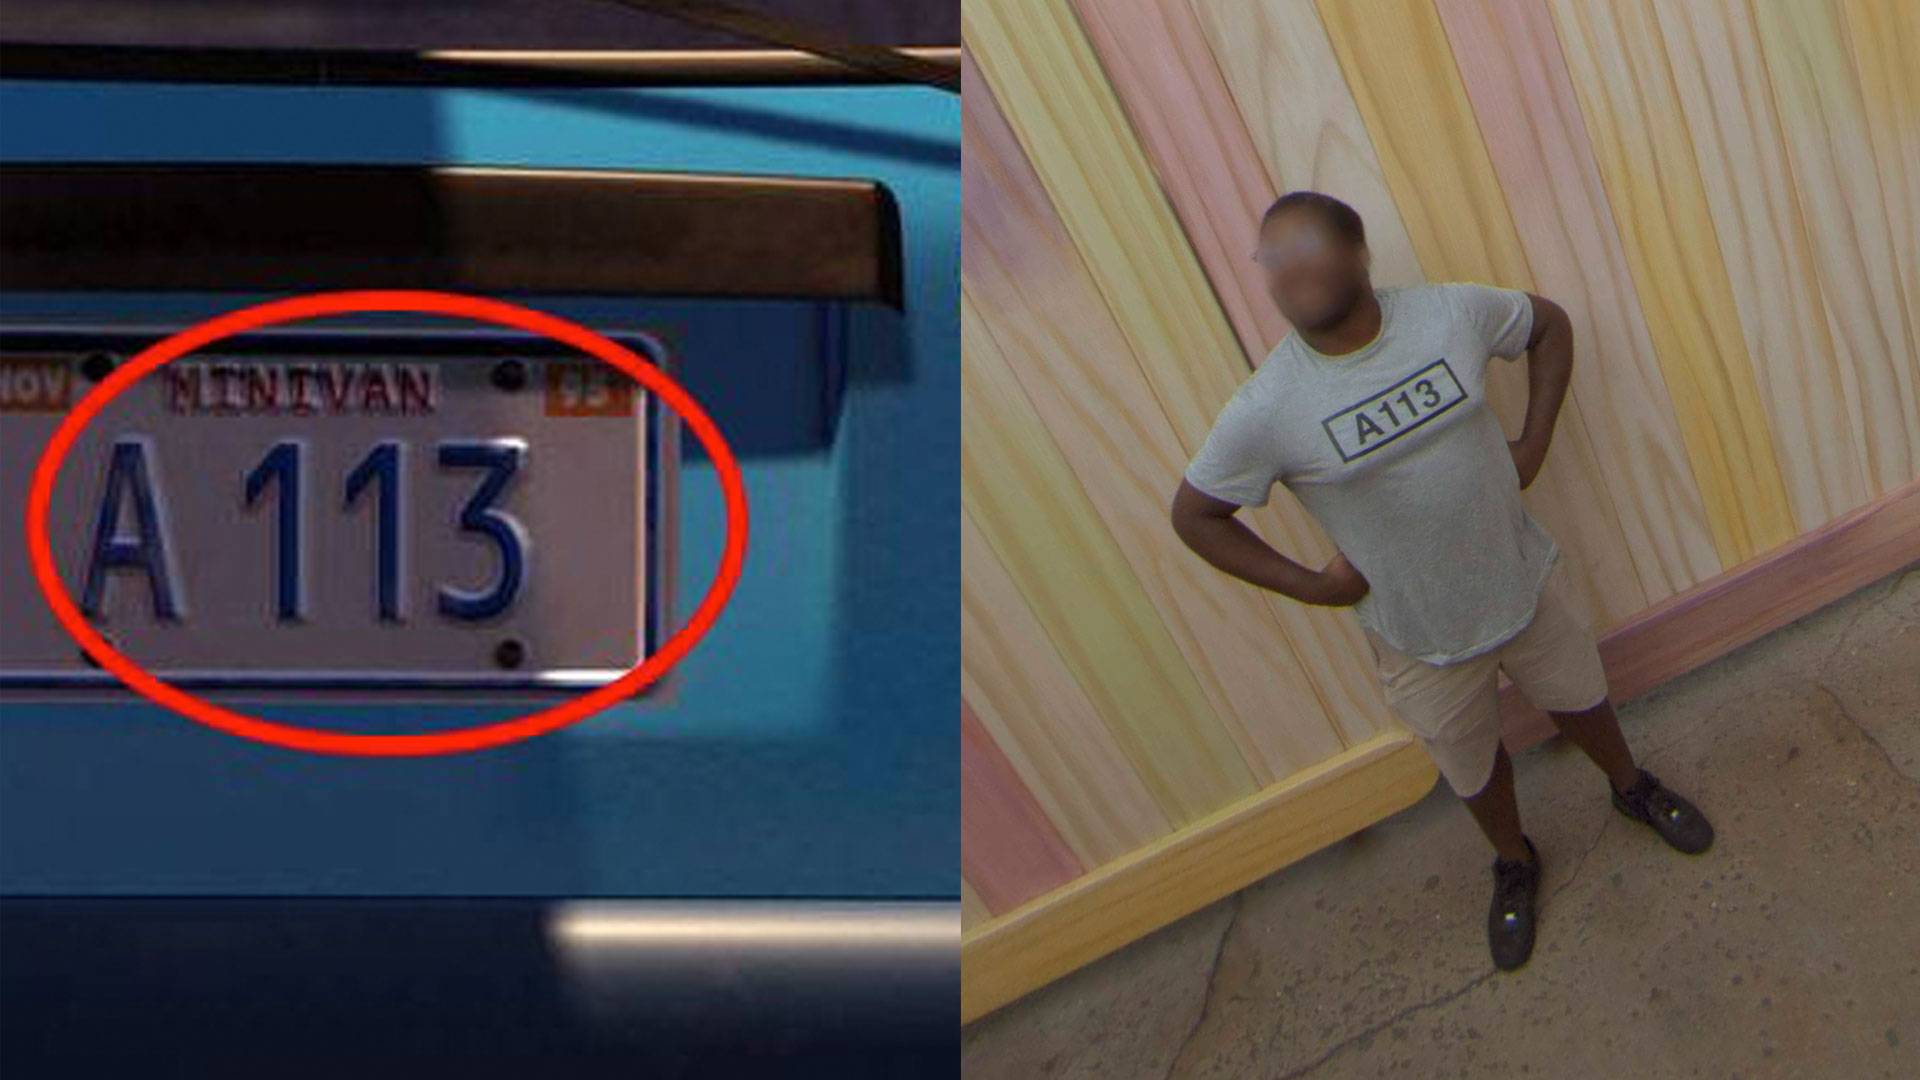 “A113”, a hidden sequence appearing in each and every Pixar film